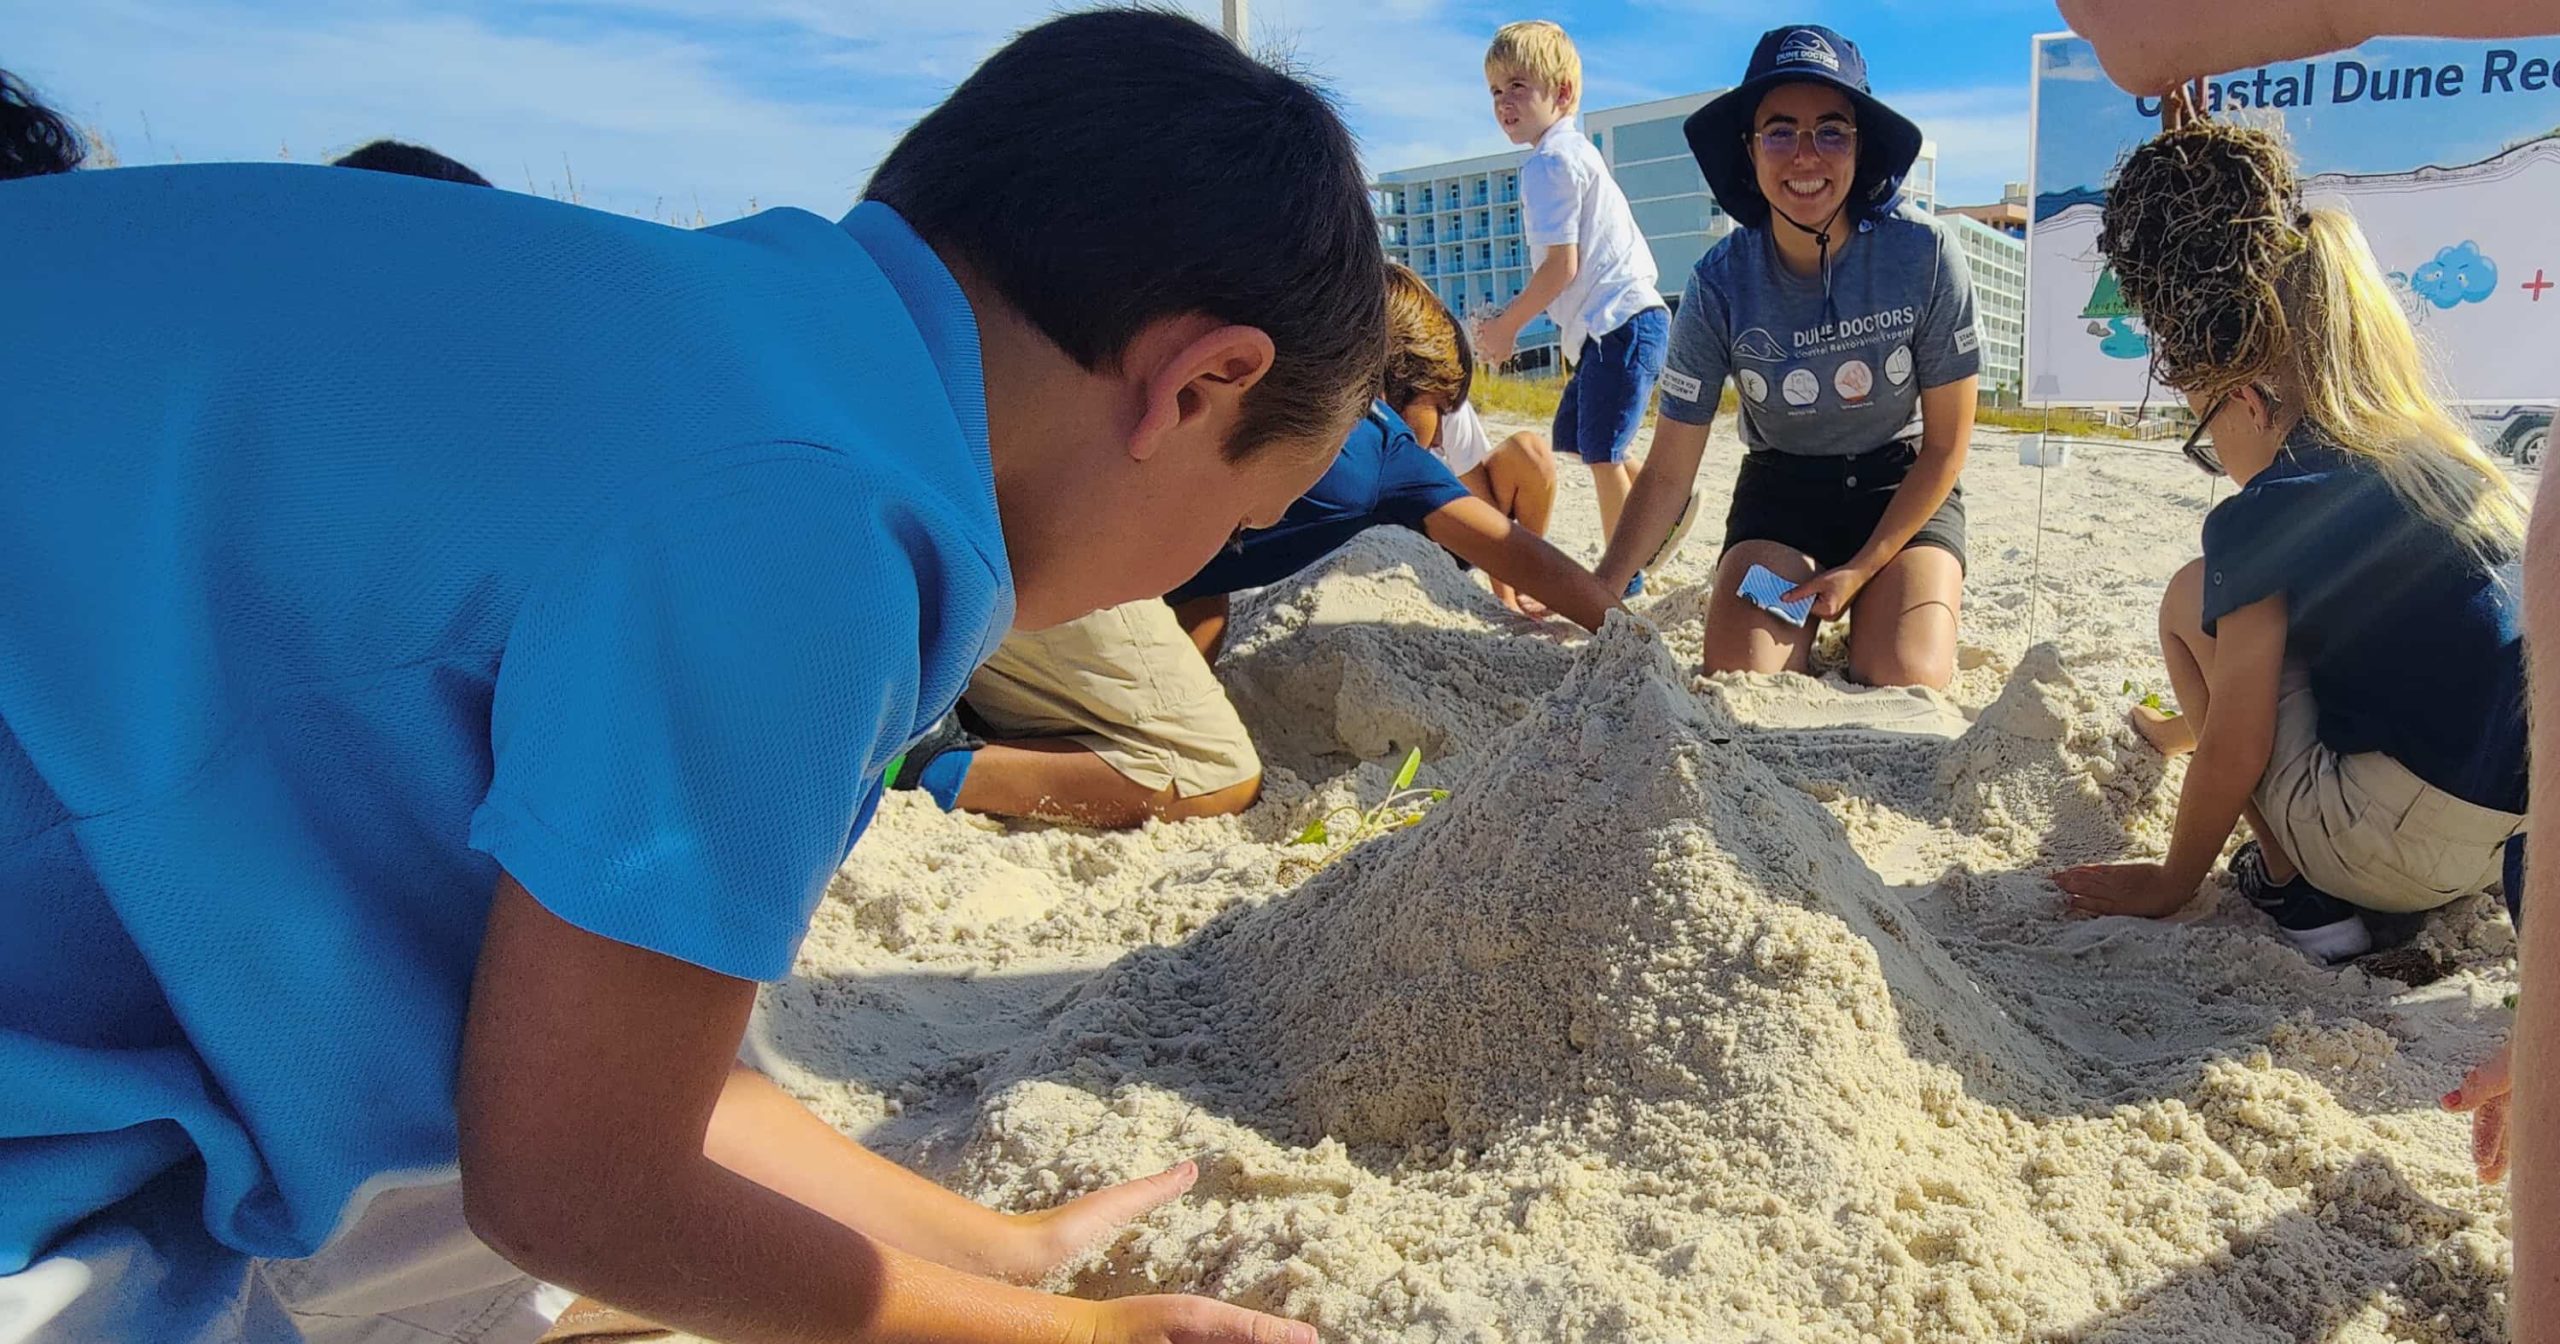 A group of students try to build a coastal dune with their hands